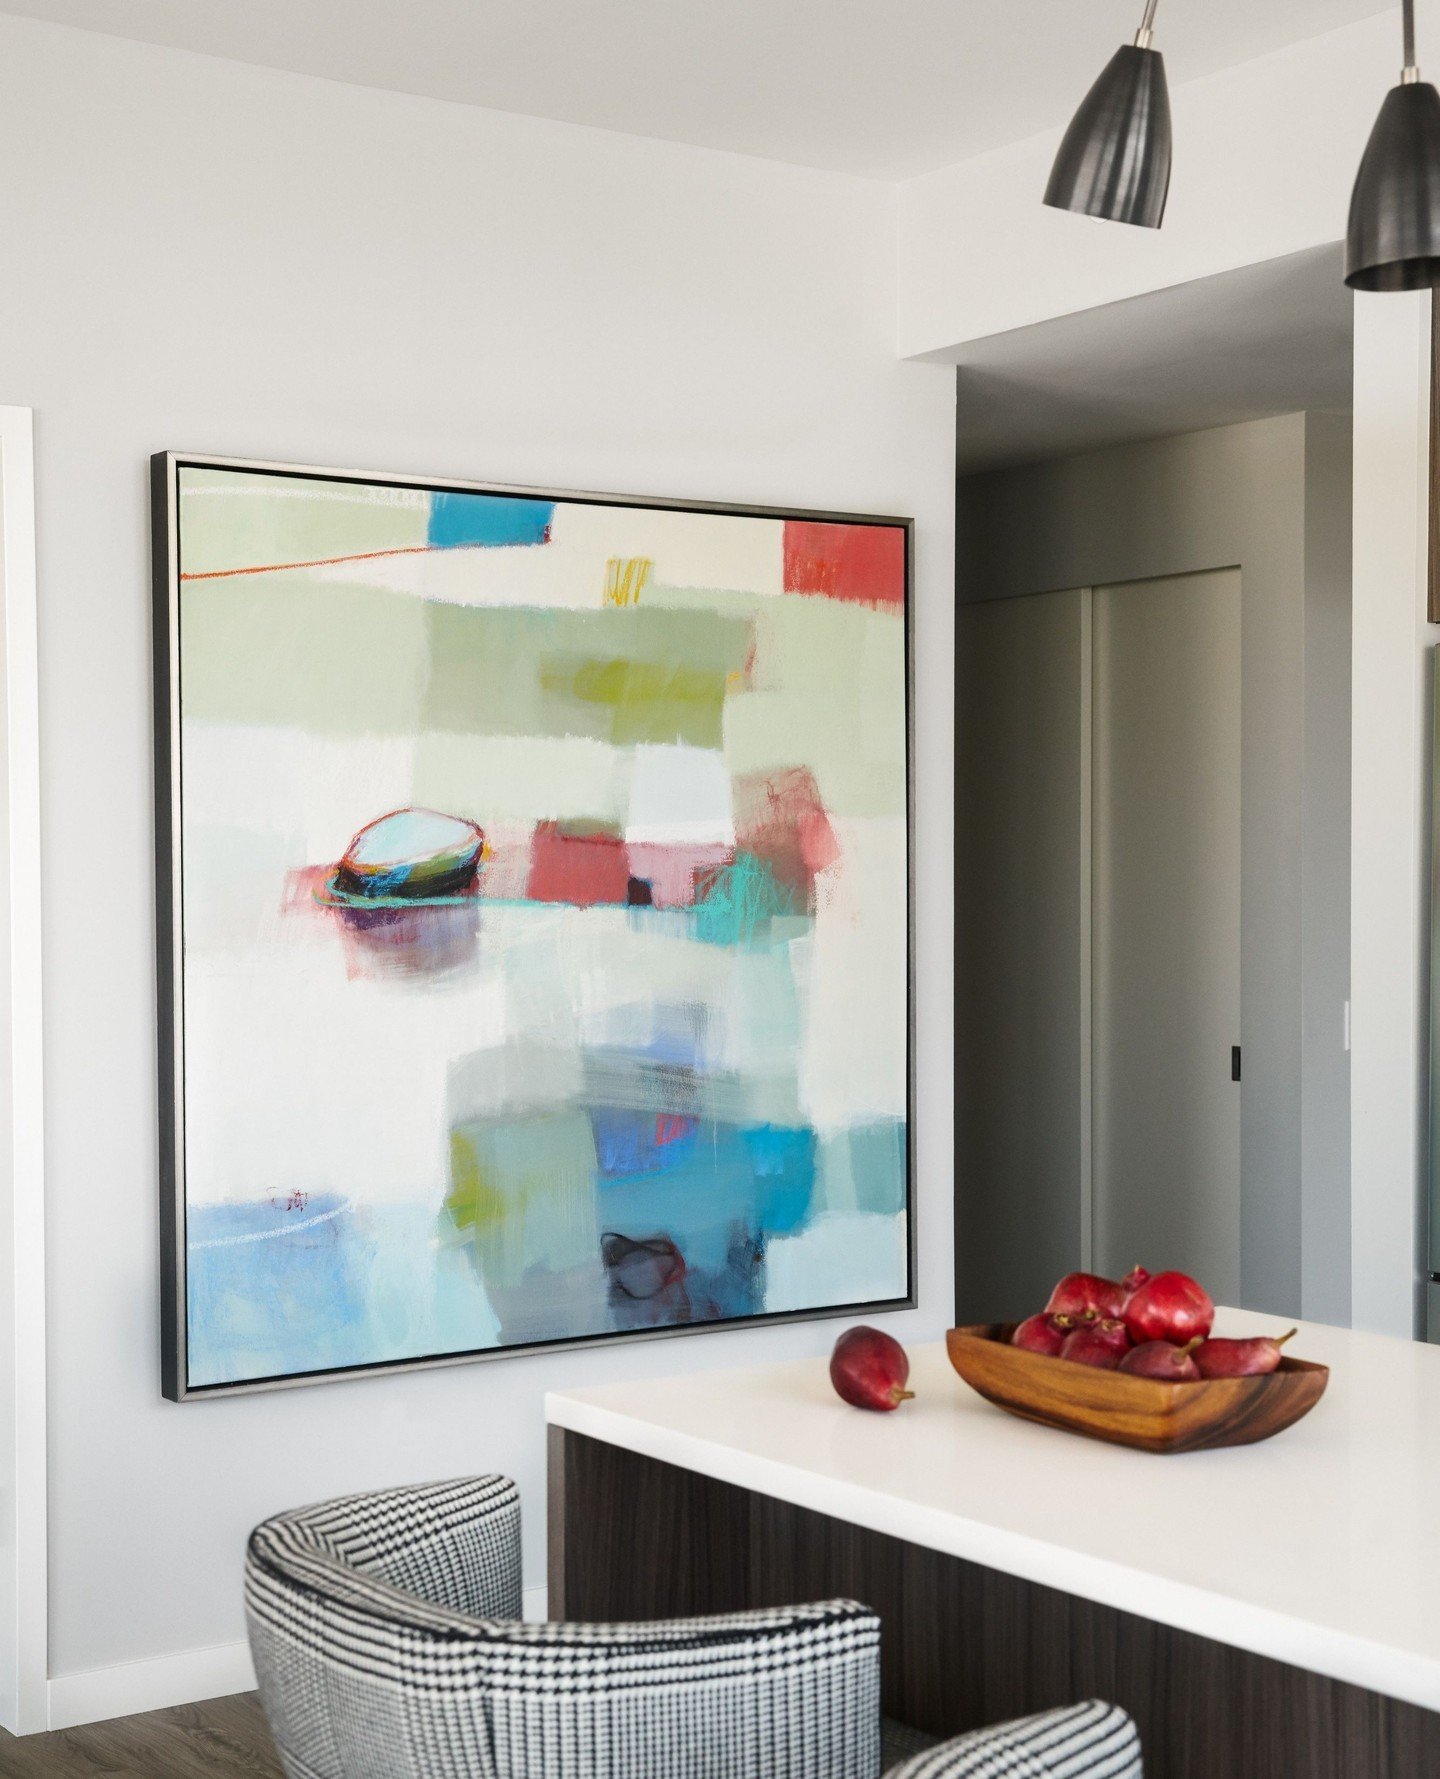 ⁠We spend a majority of our time in the Kitchen. Don't forget the heart of the home when selecting art. ⁠
⁠
📸: @kuohphotographyinteriors as seen in @luxemagazine ⁠
⁠
#studiomunroe #roomoftheday #interiordesign #sanfrancisco #kitchendecor #artintheki